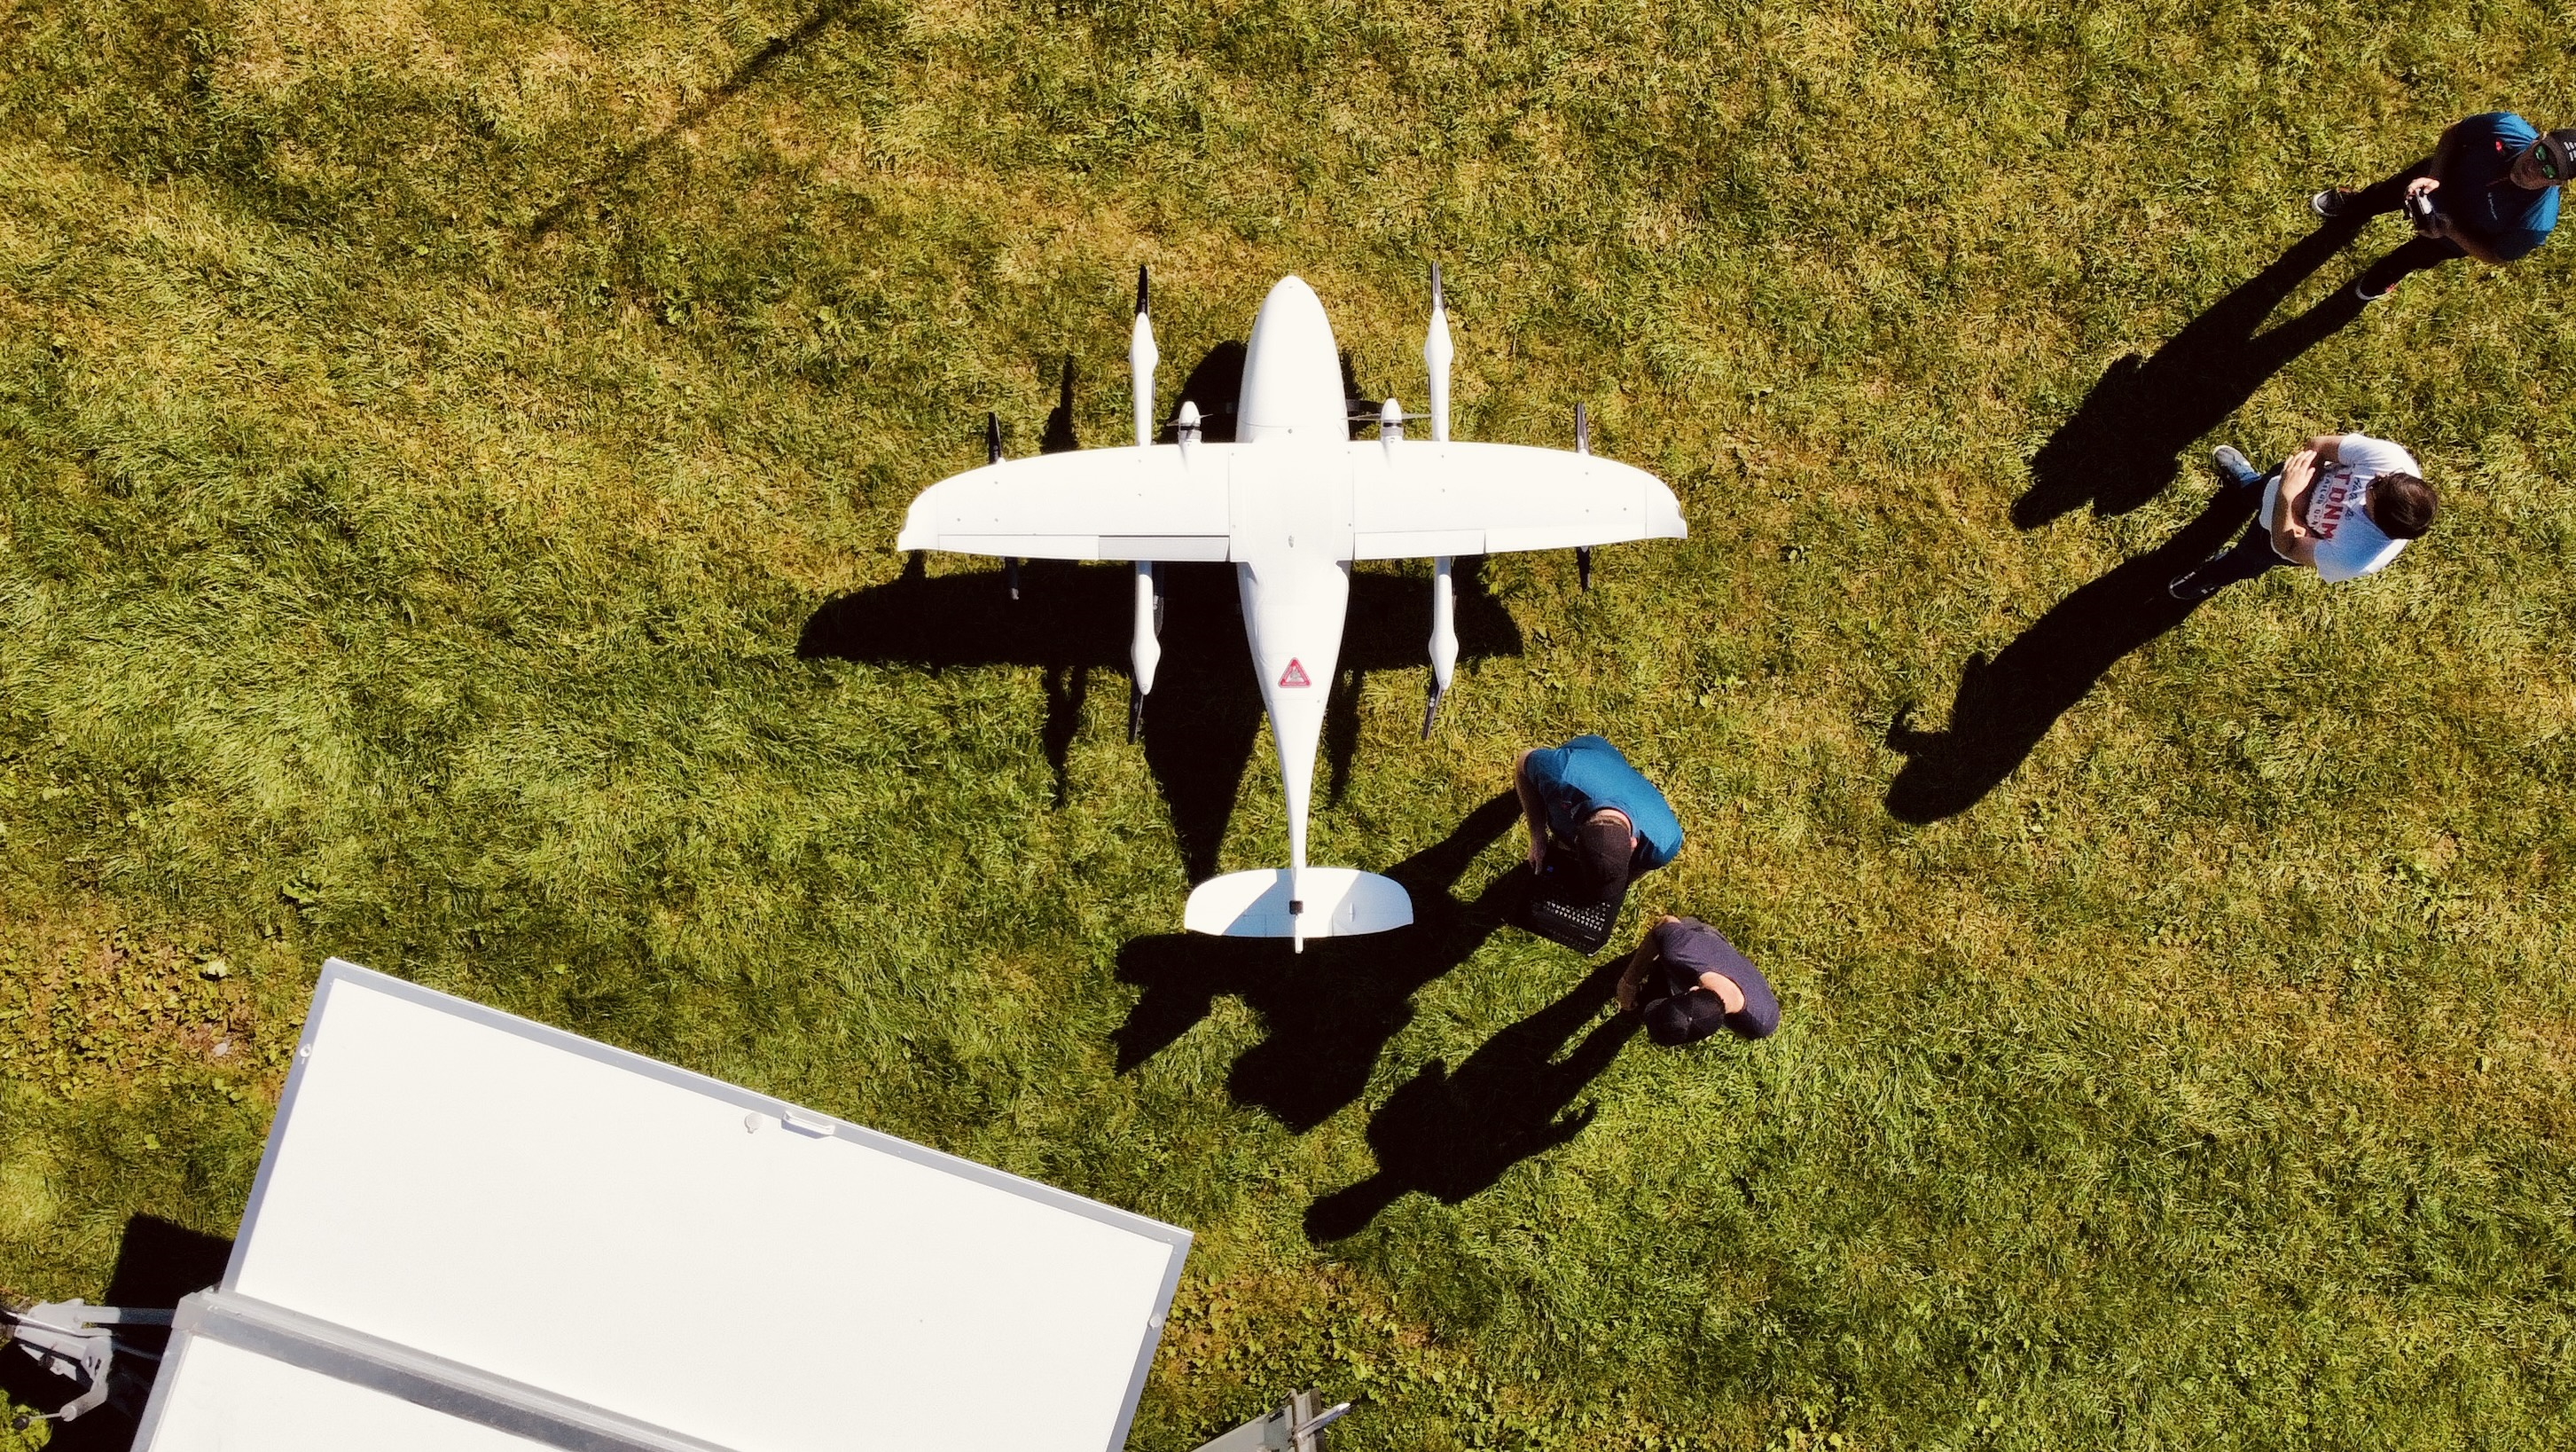 Top view of the PW.Orca cargo drone- Credits: ADLC